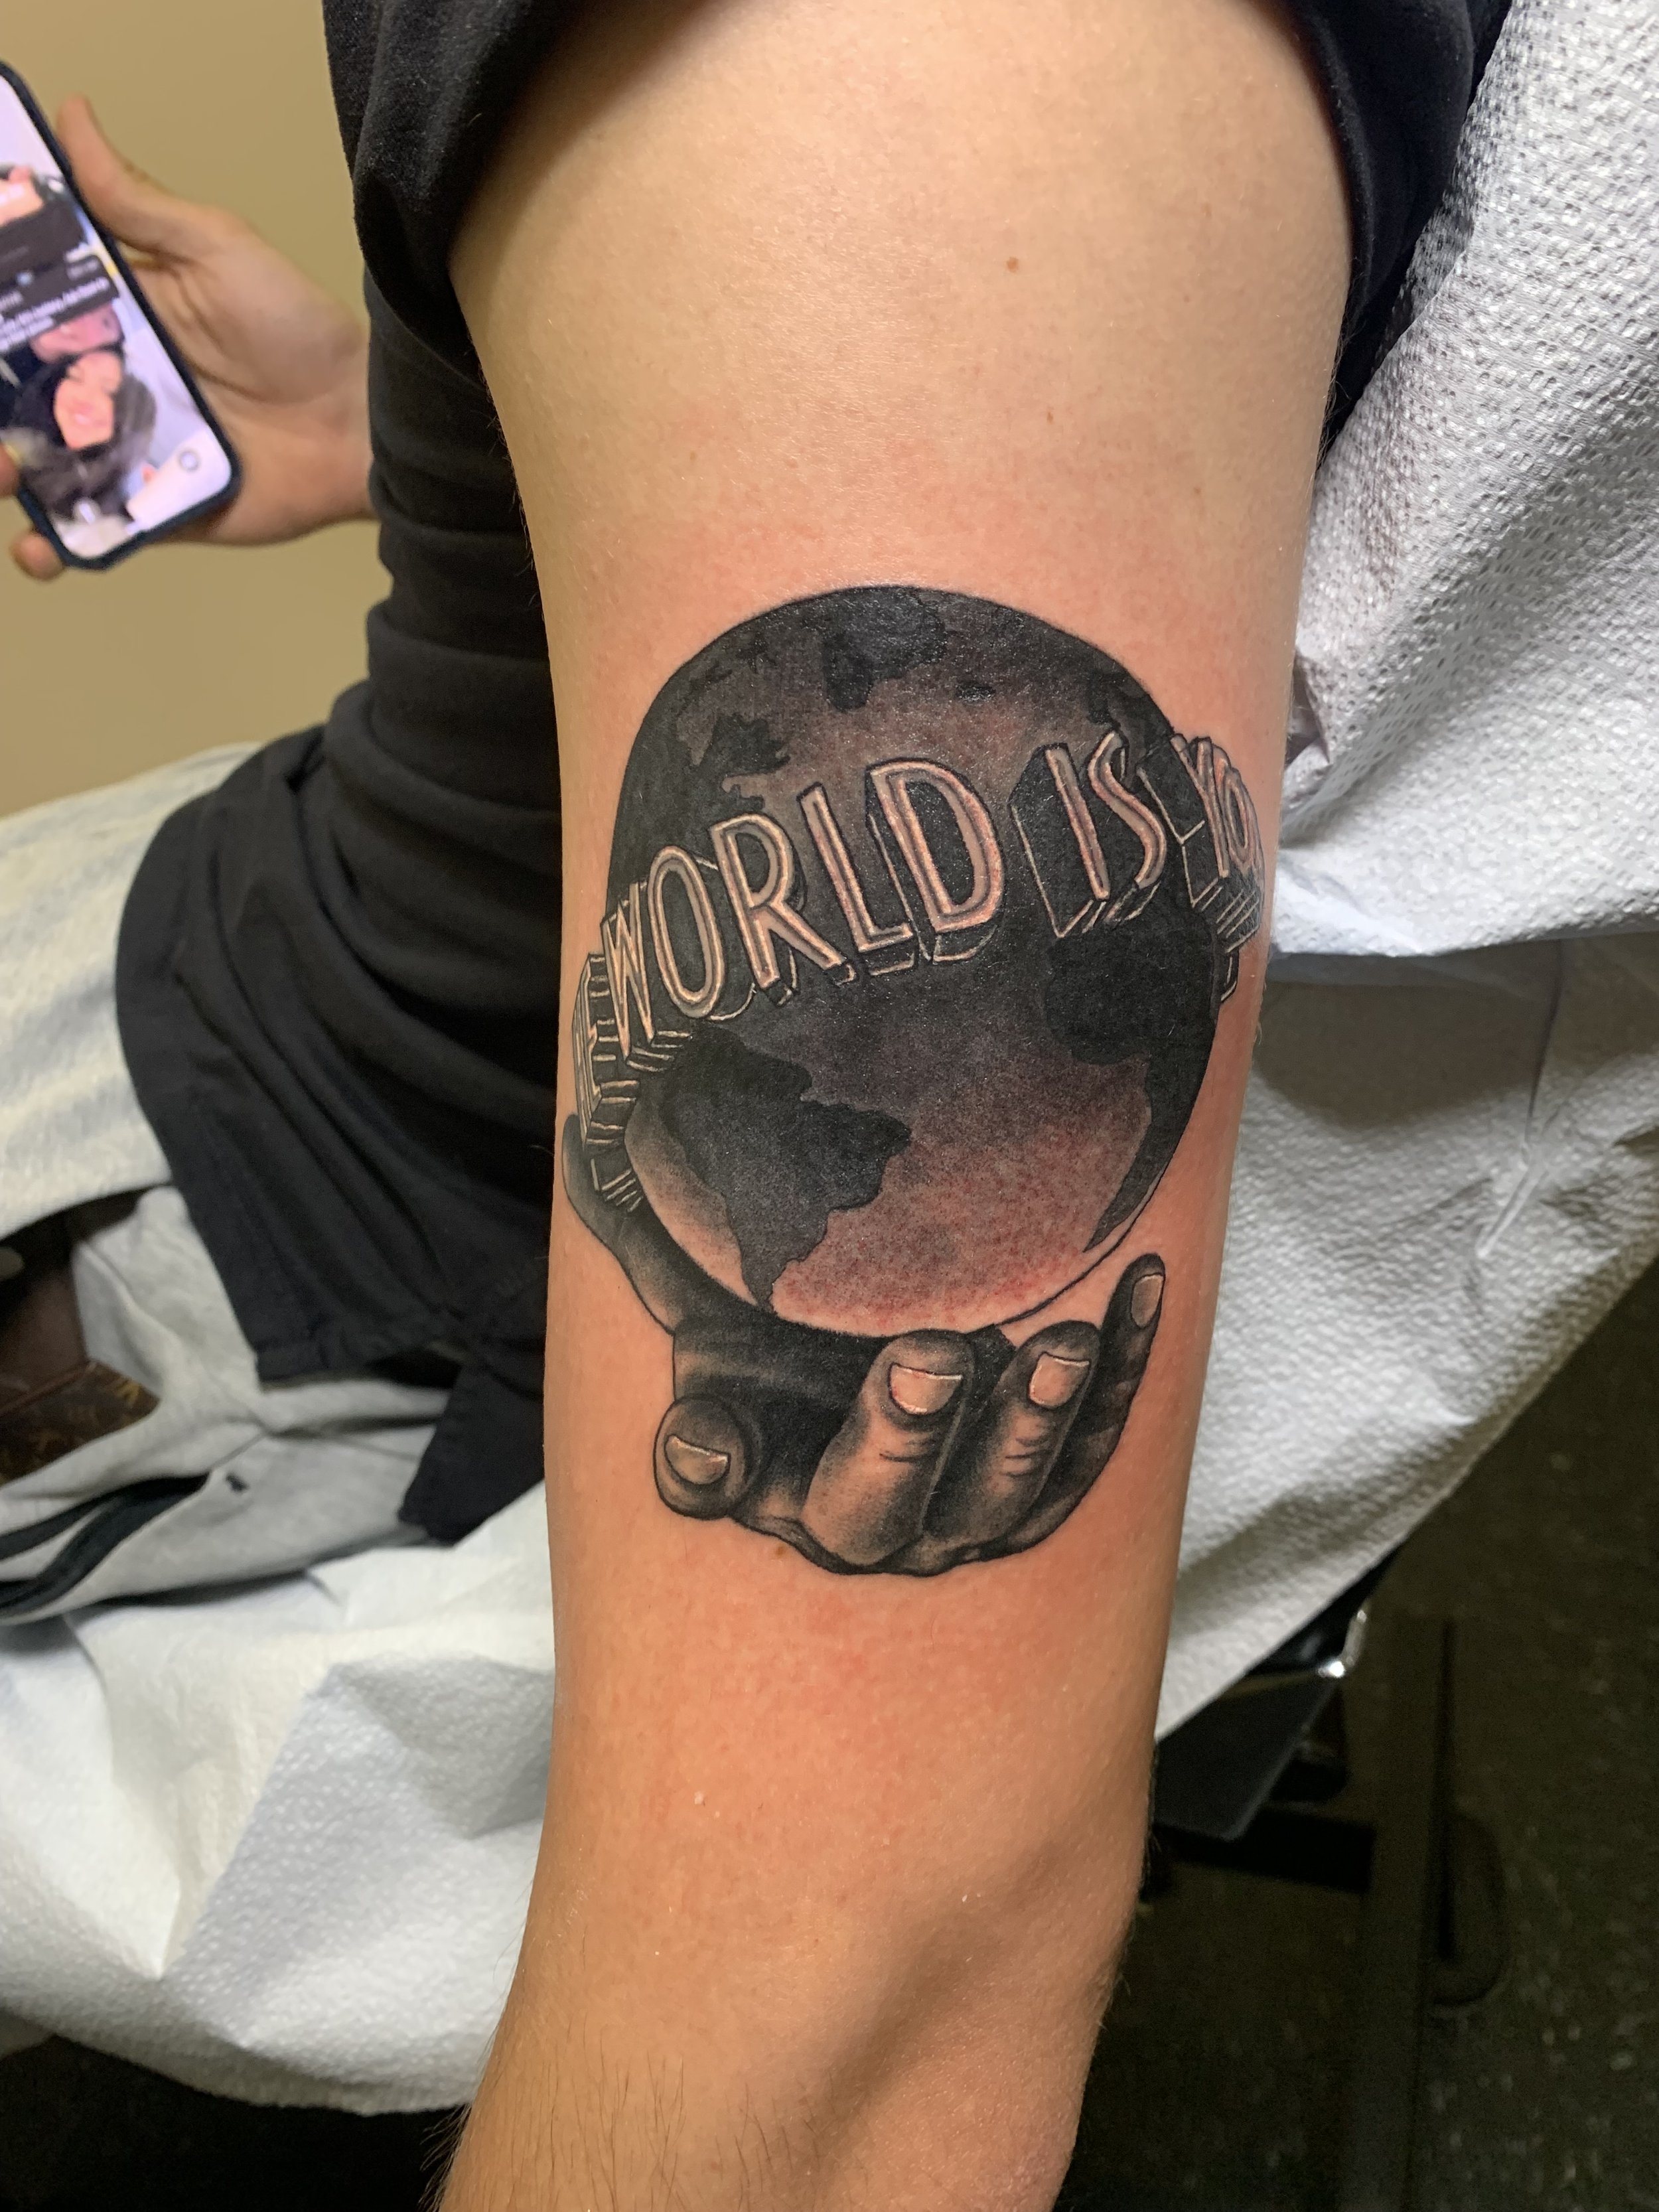 20 incredible The World is Yours tattoo ideas to ink on your body   YENCOMGH